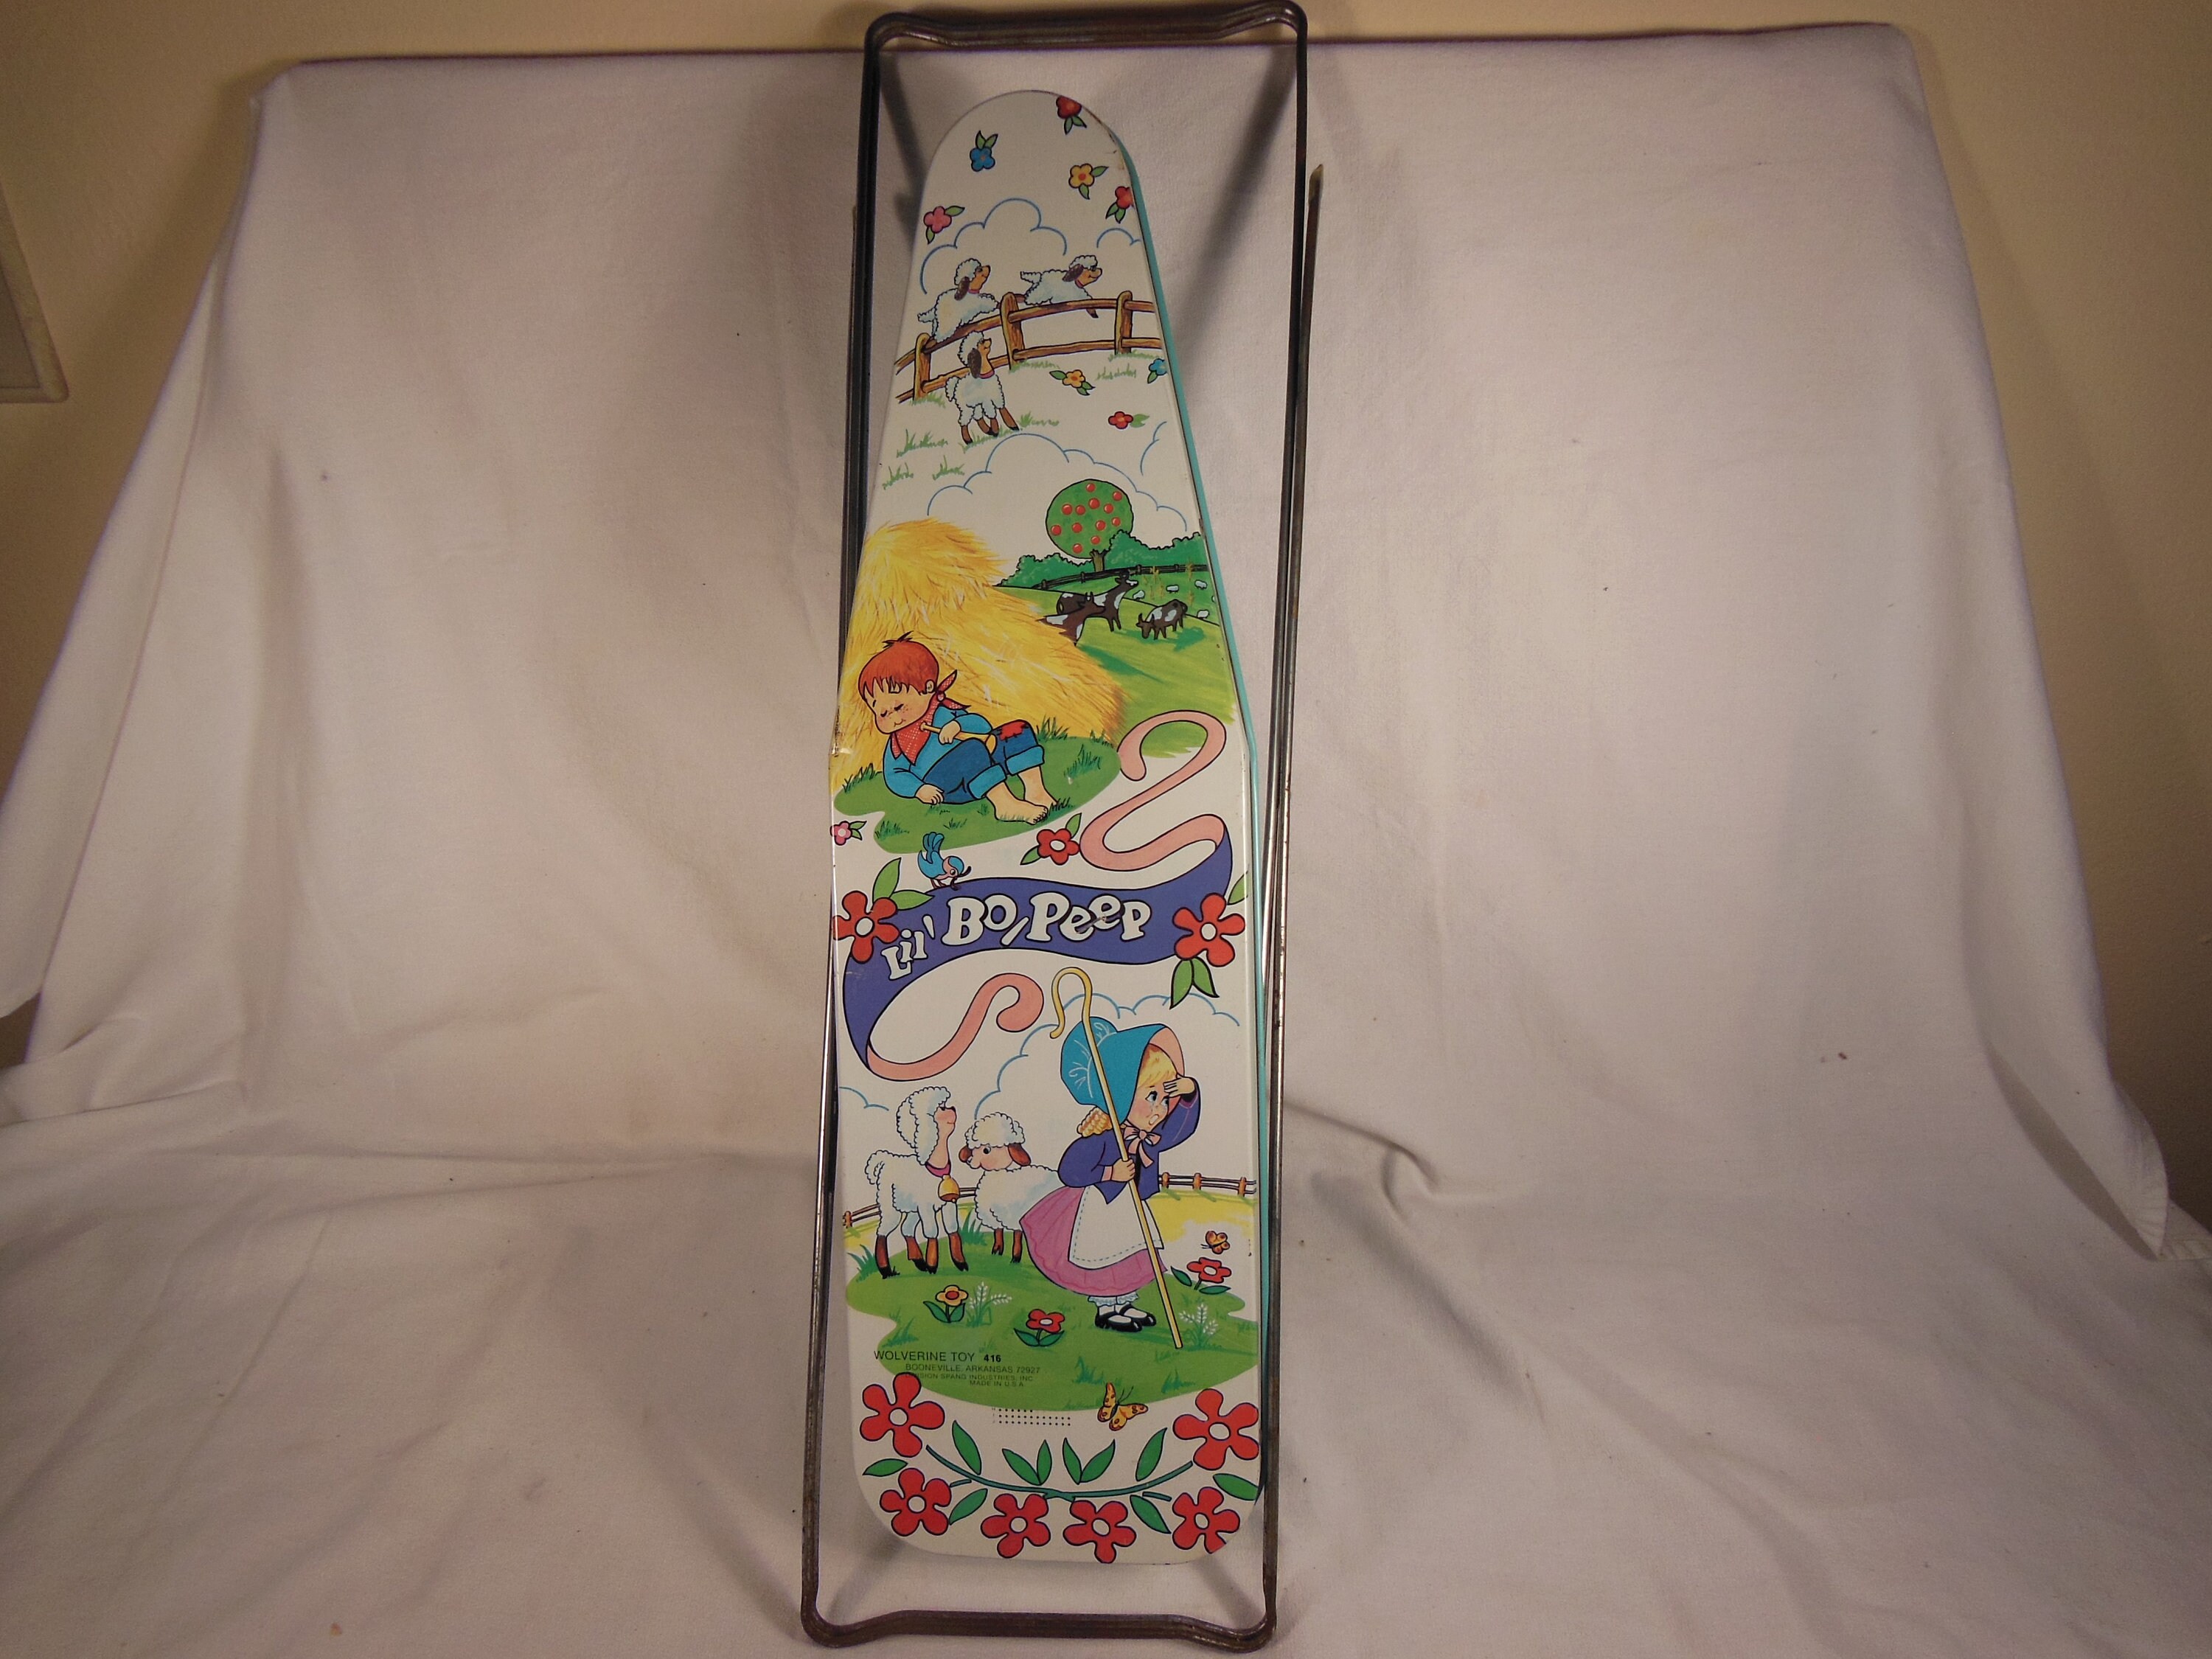 Wolverine Tin Lithograph Toy Ironing Board Featuring Little Bo-Peep wall  decor